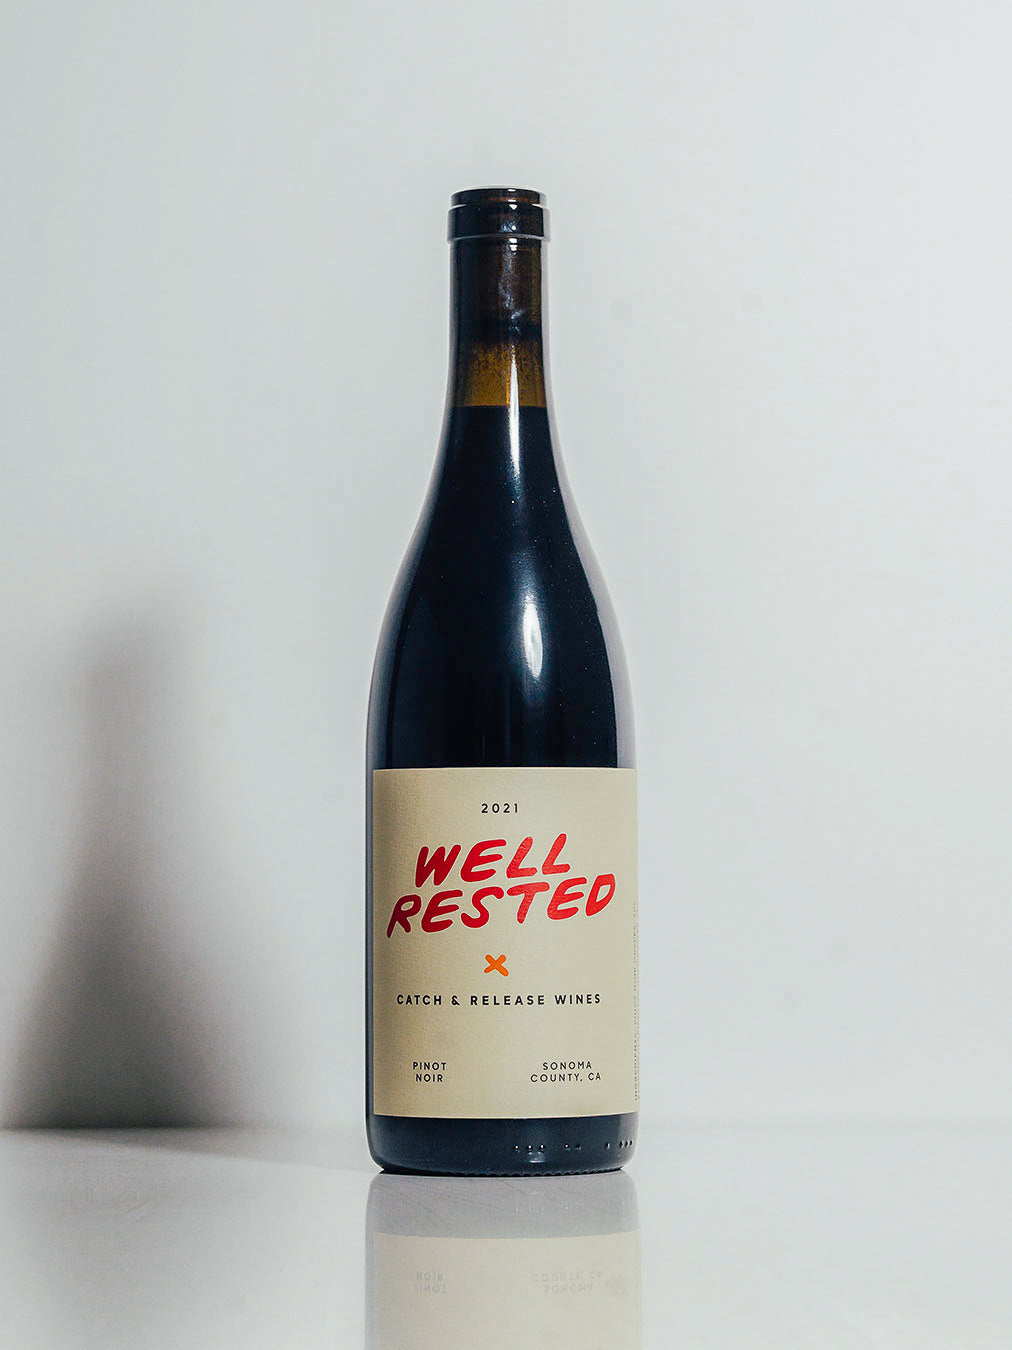 Catch & Release Wines 2021 Well Rested Pinot Noir made from organic grapes.